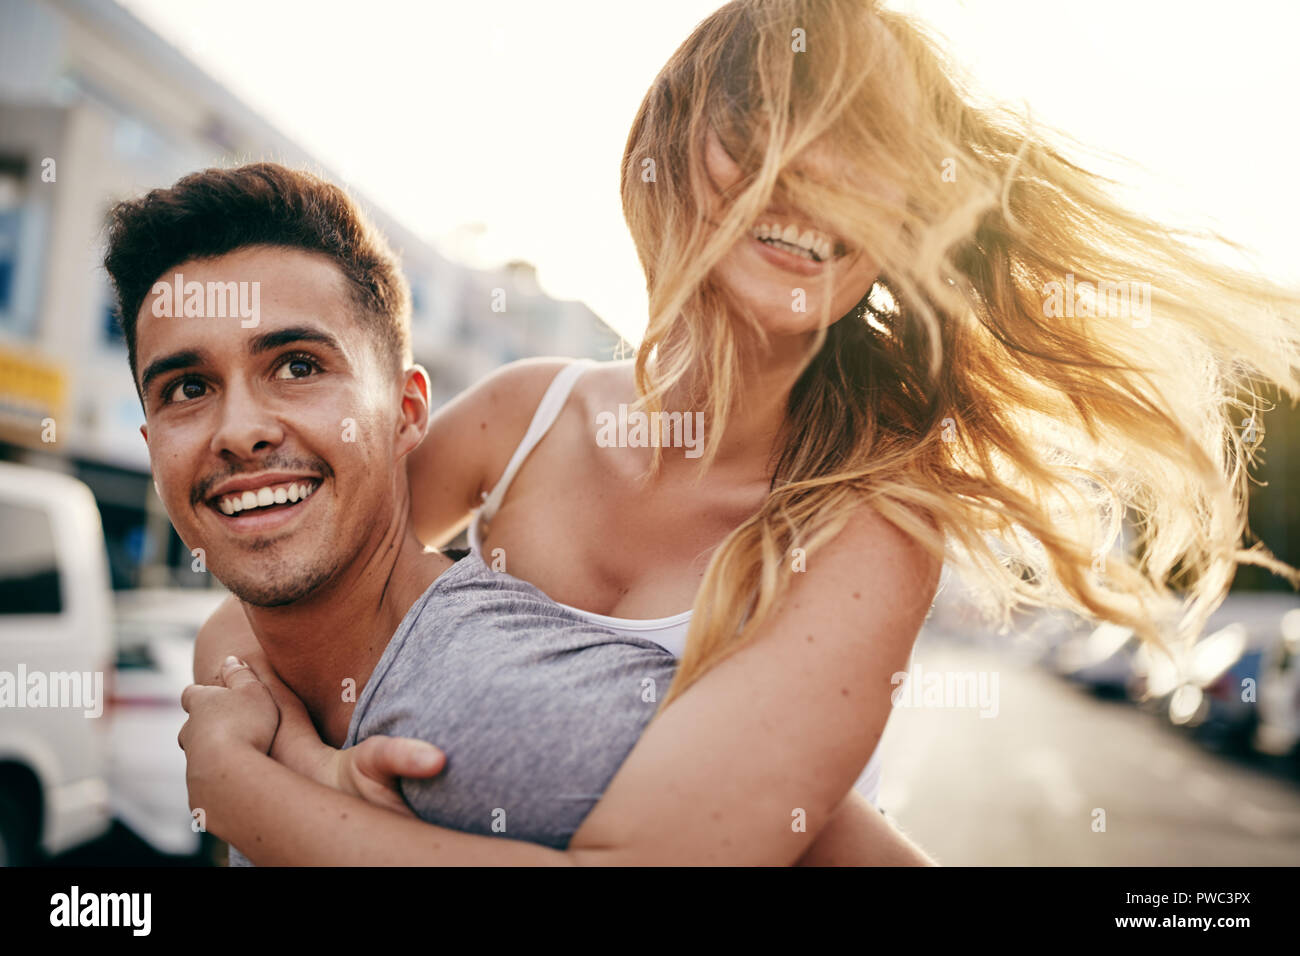 Laughing young woman being piggybacked by her boyfriend while enjoying a day together in the city Stock Photo